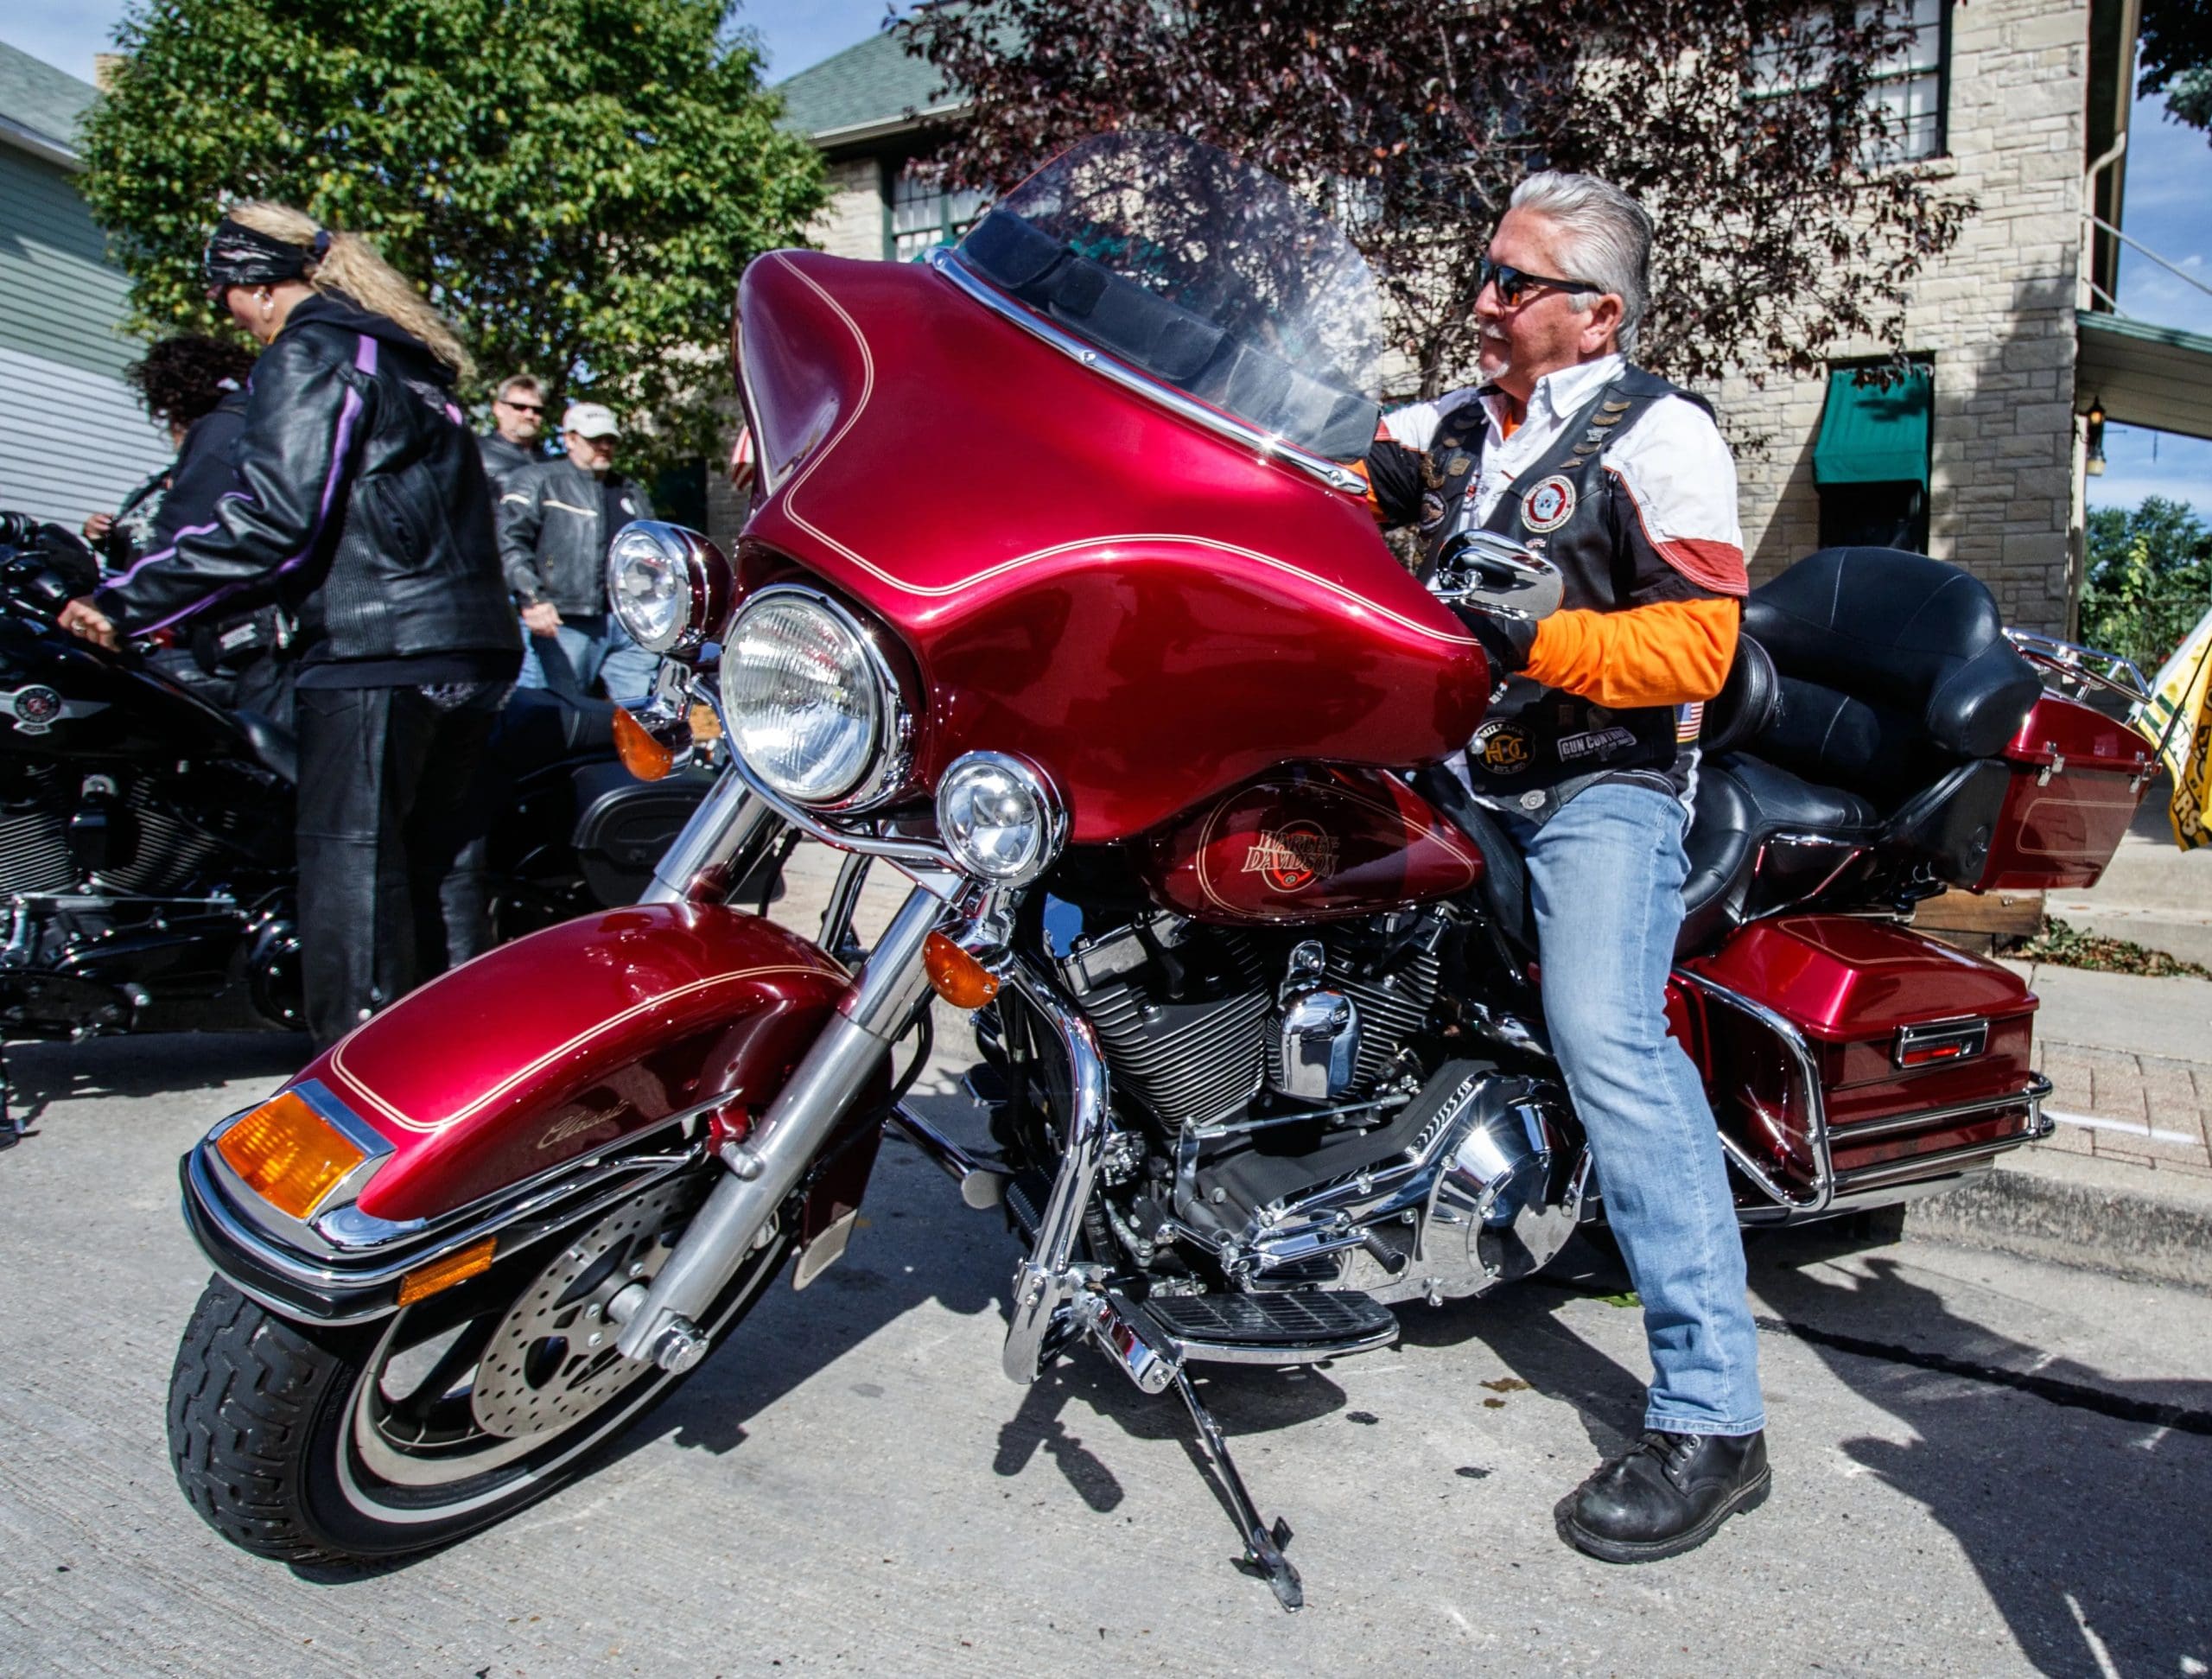 A man on a big Harley motorcycle. Photo credited to USA Today.